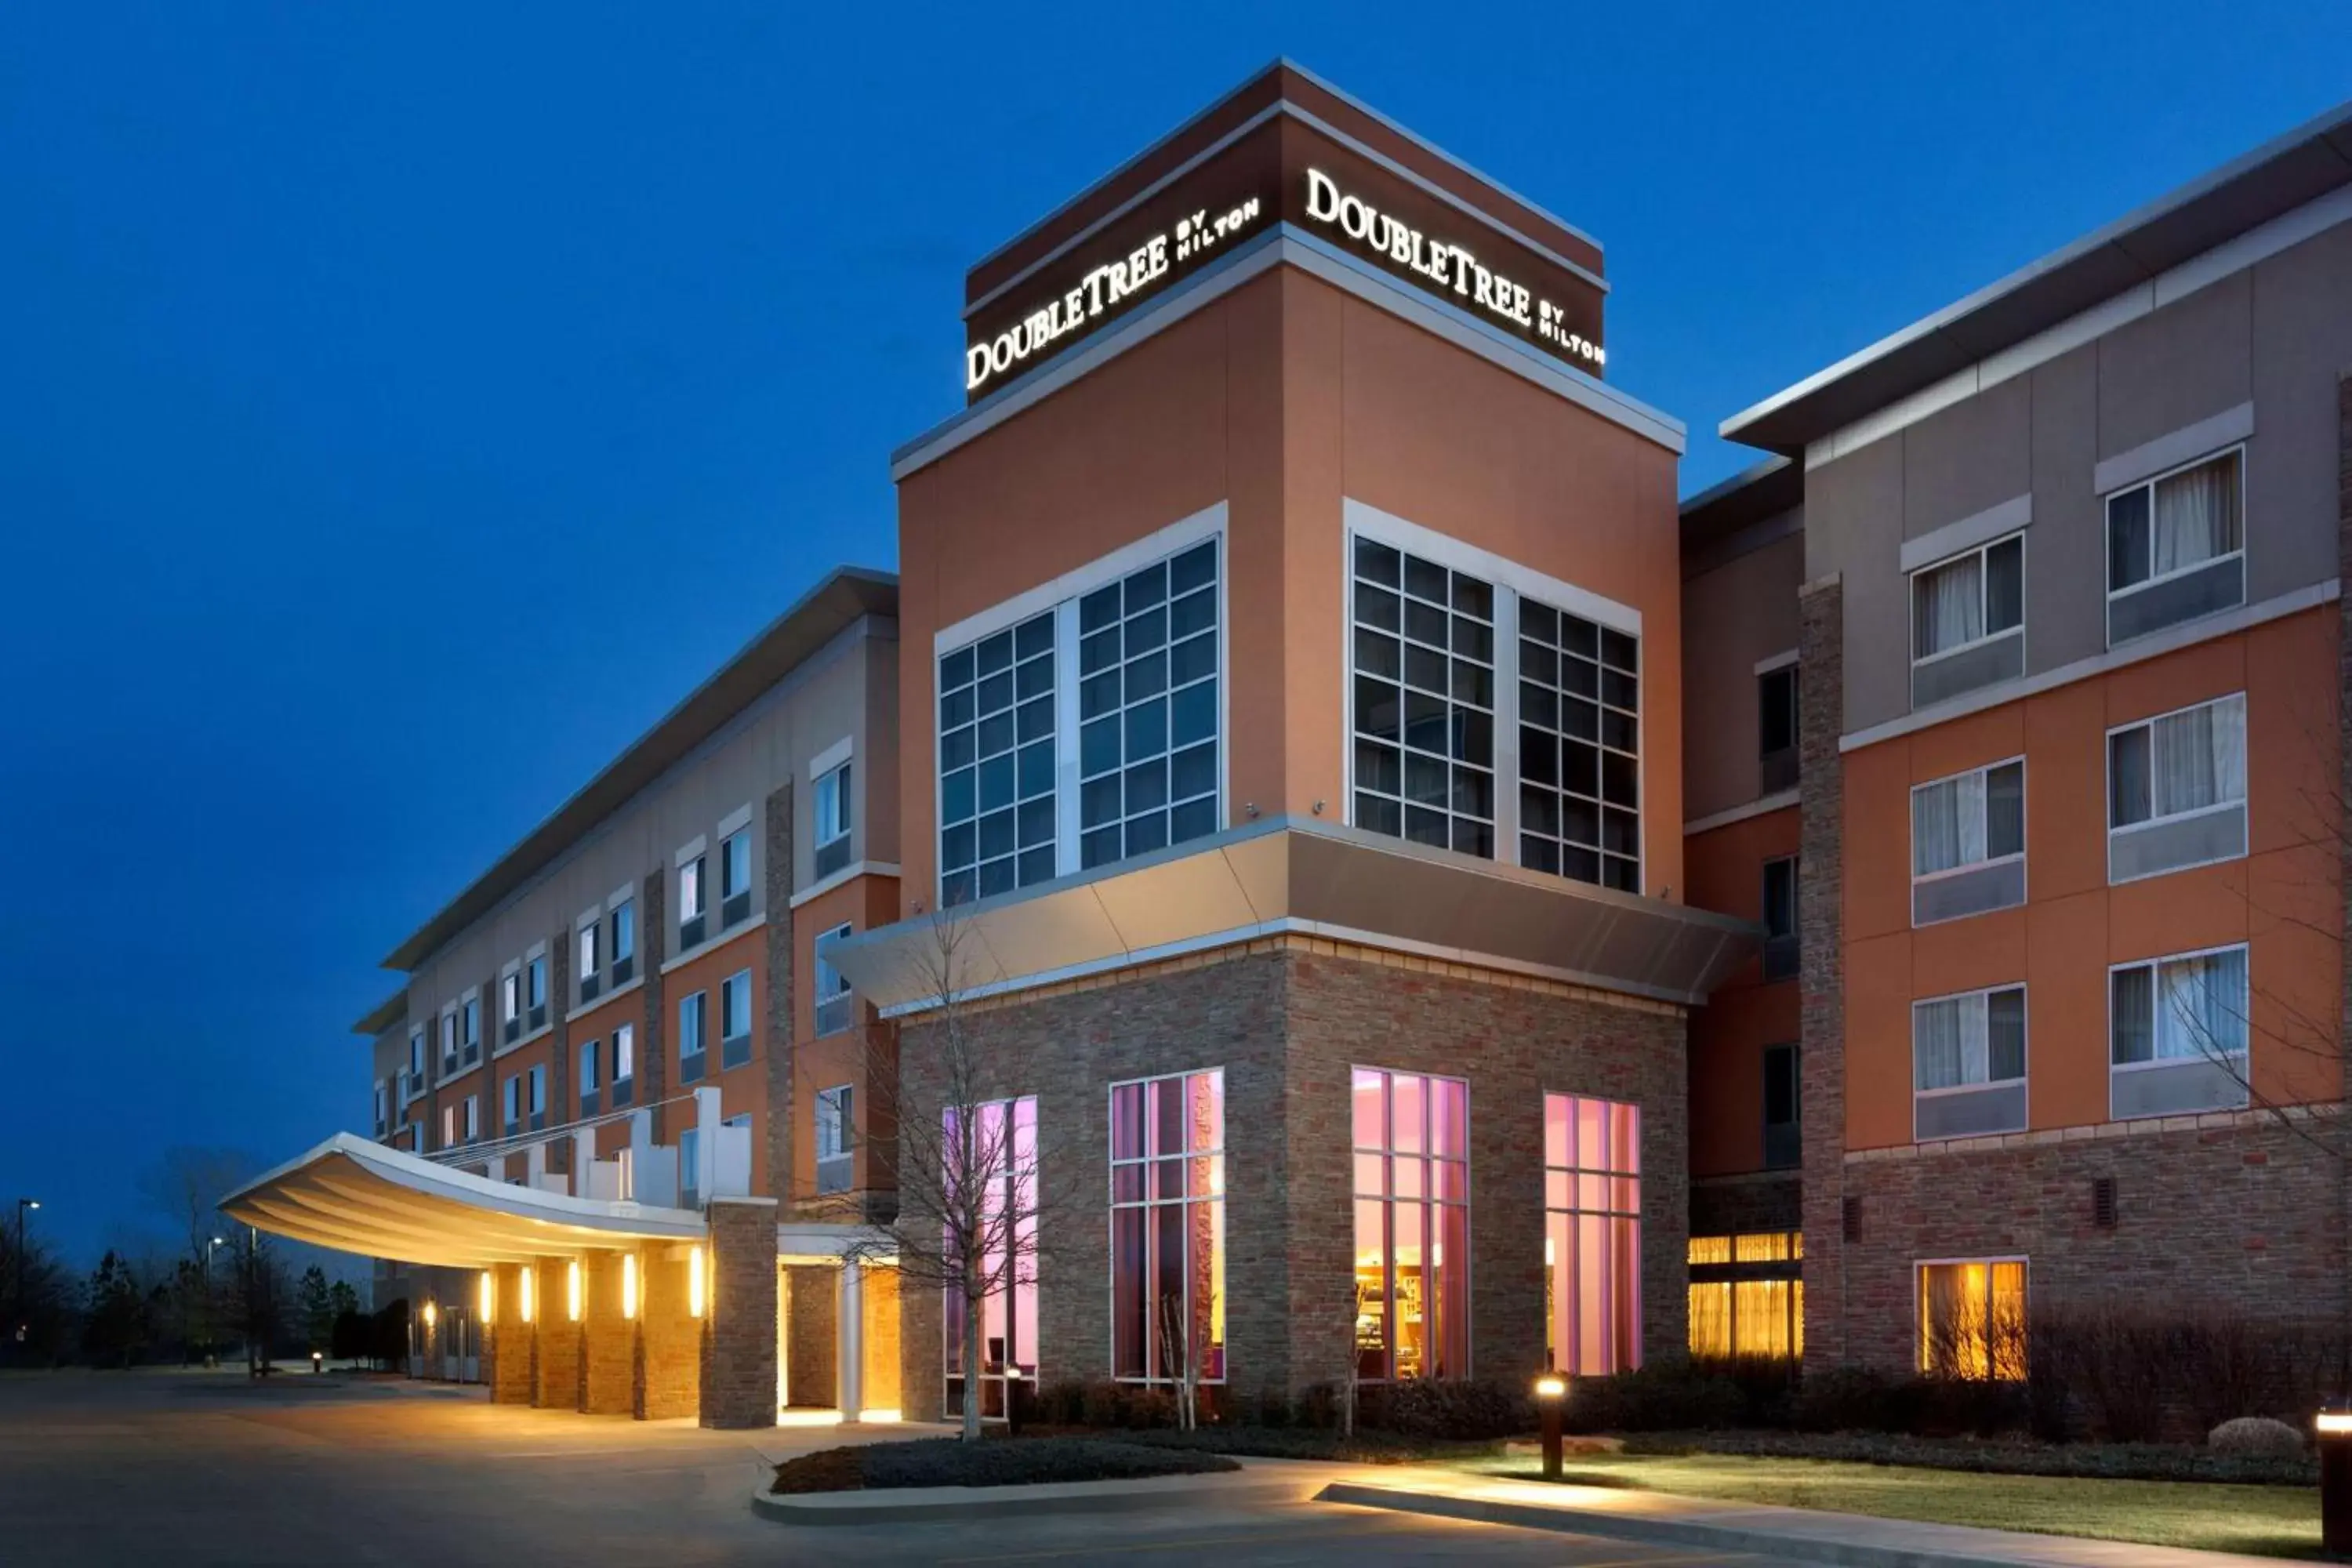 Property Building in DoubleTree by Hilton Hotel Oklahoma City Airport